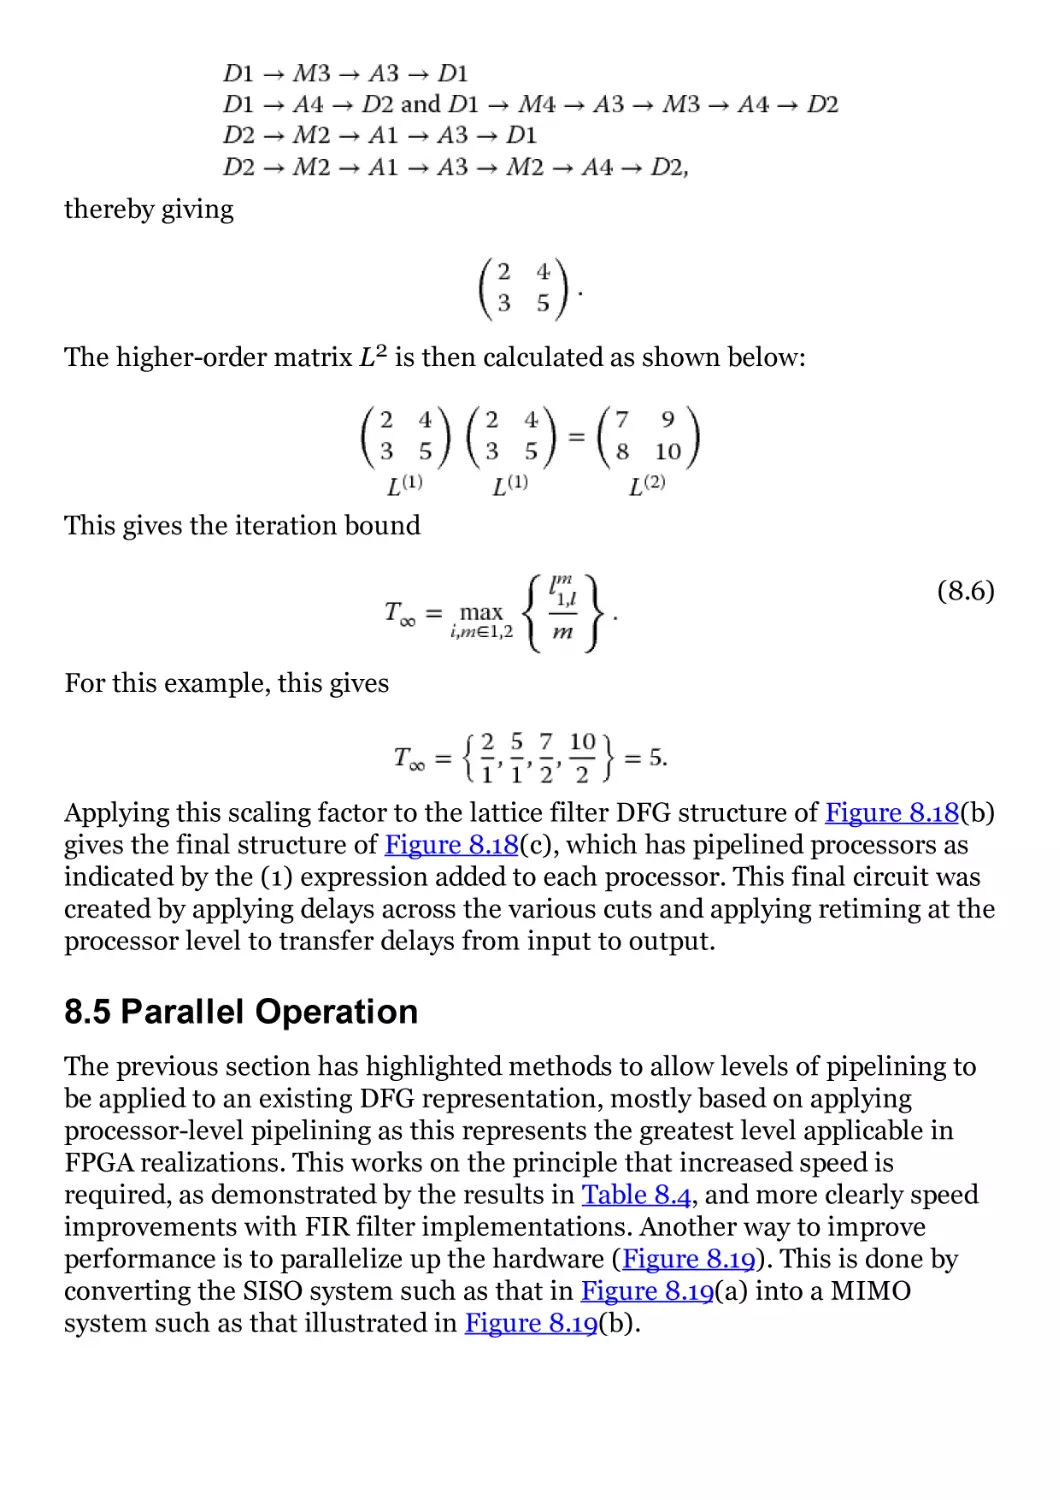 8.5 Parallel Operation